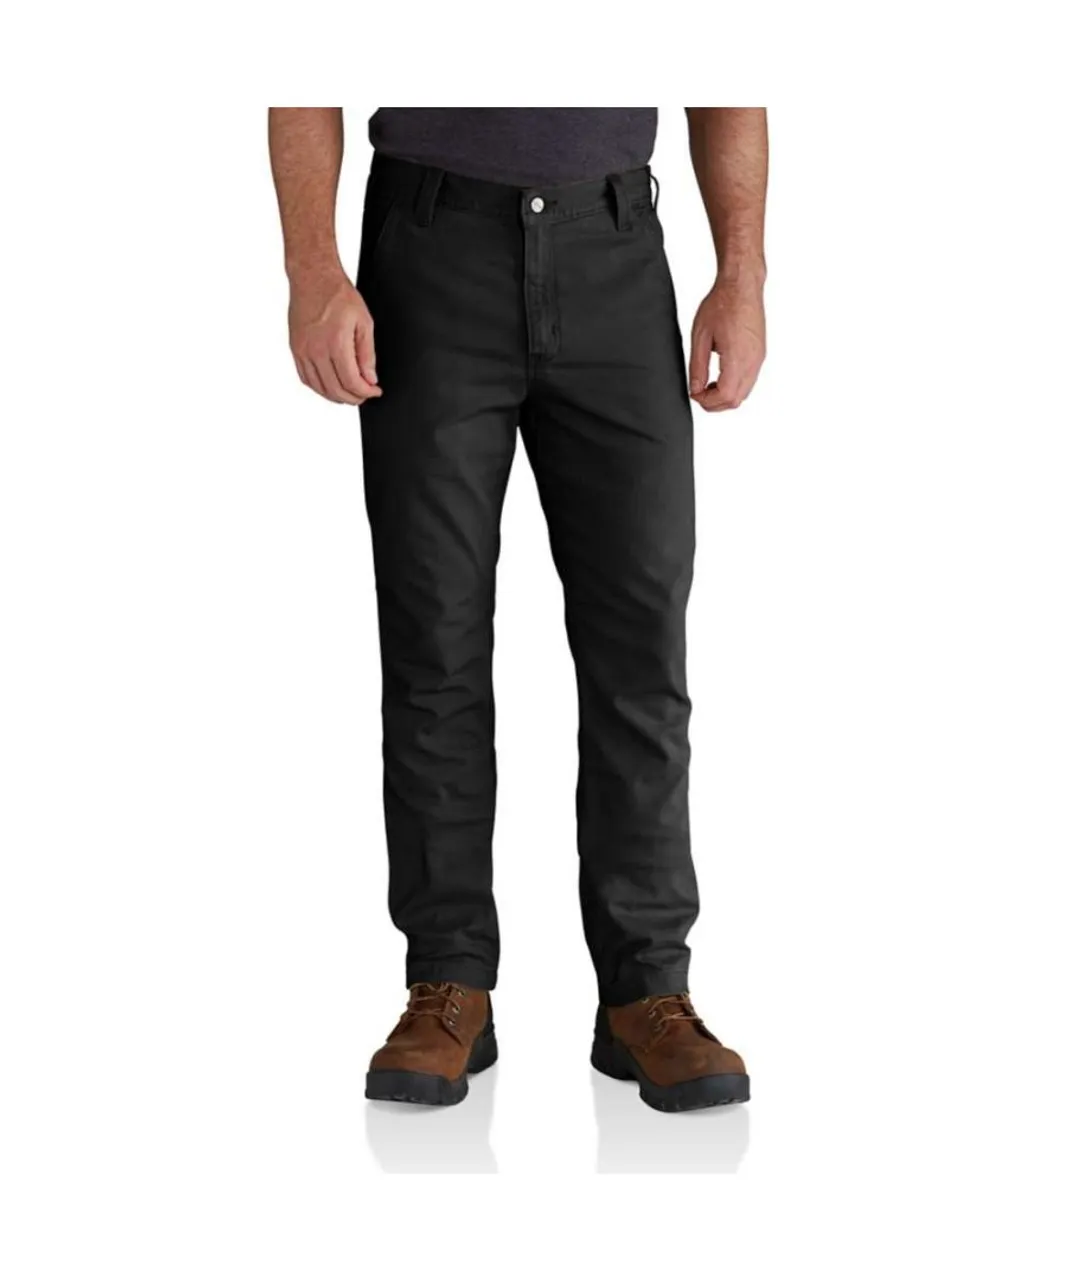 Carhartt Mens Rigby Straight Fit Stretch Work Pants - Black Cotton